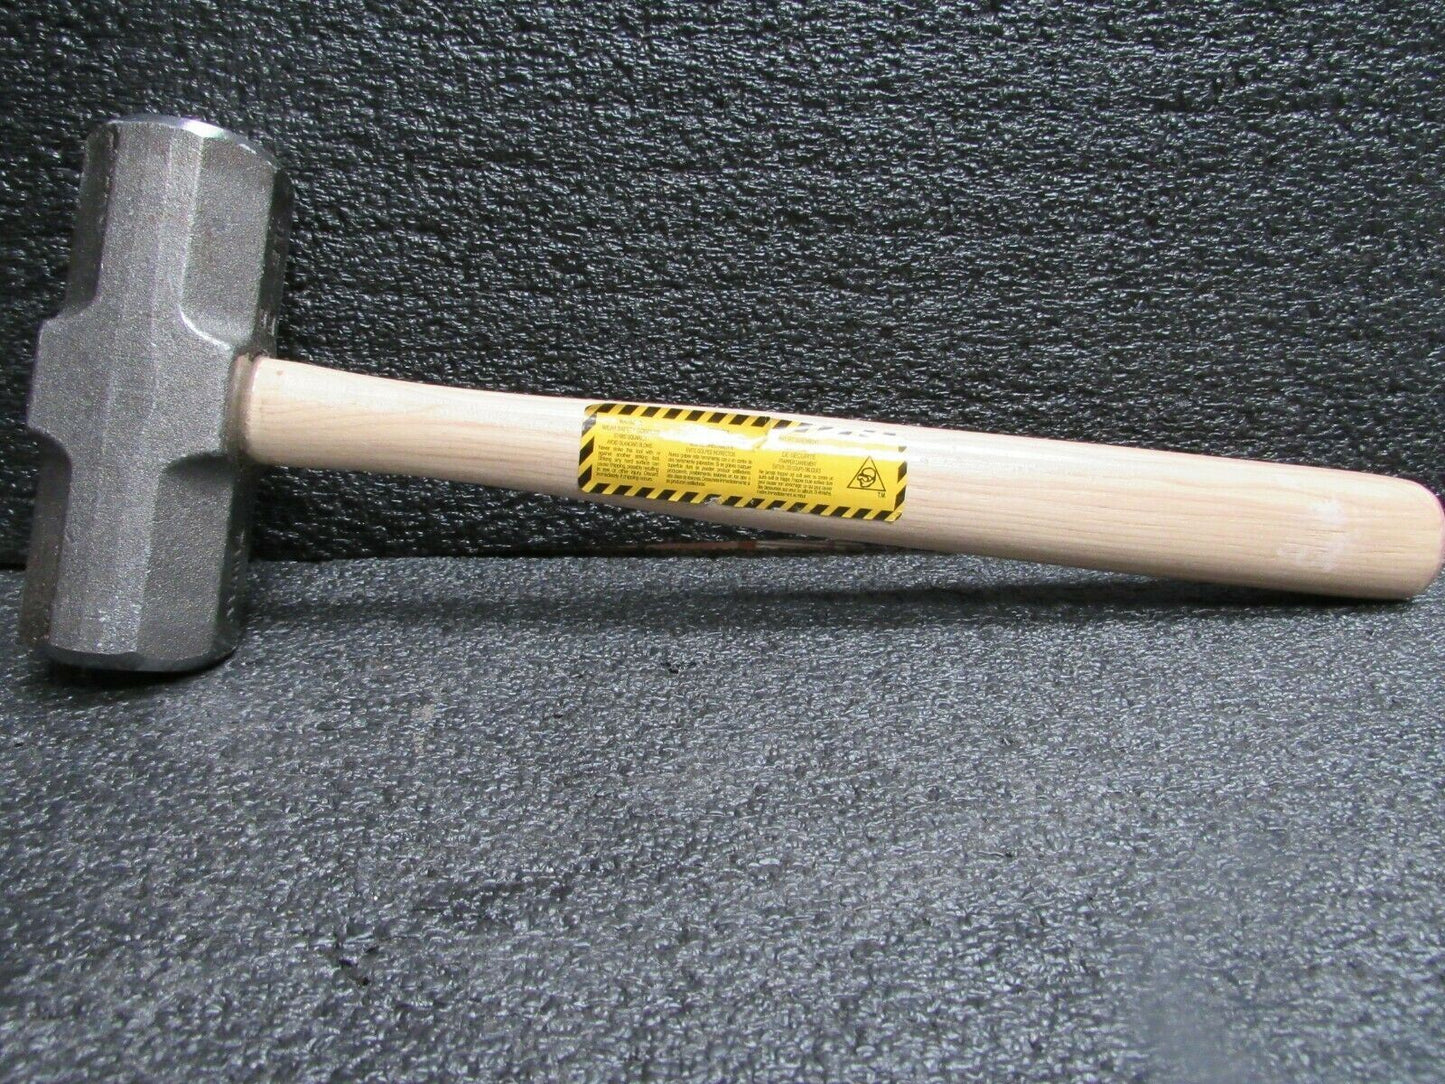 NUPLA 6894537 Double Face Sledge Hammer,4 lb.,14 in. L (184292508595-BT32)